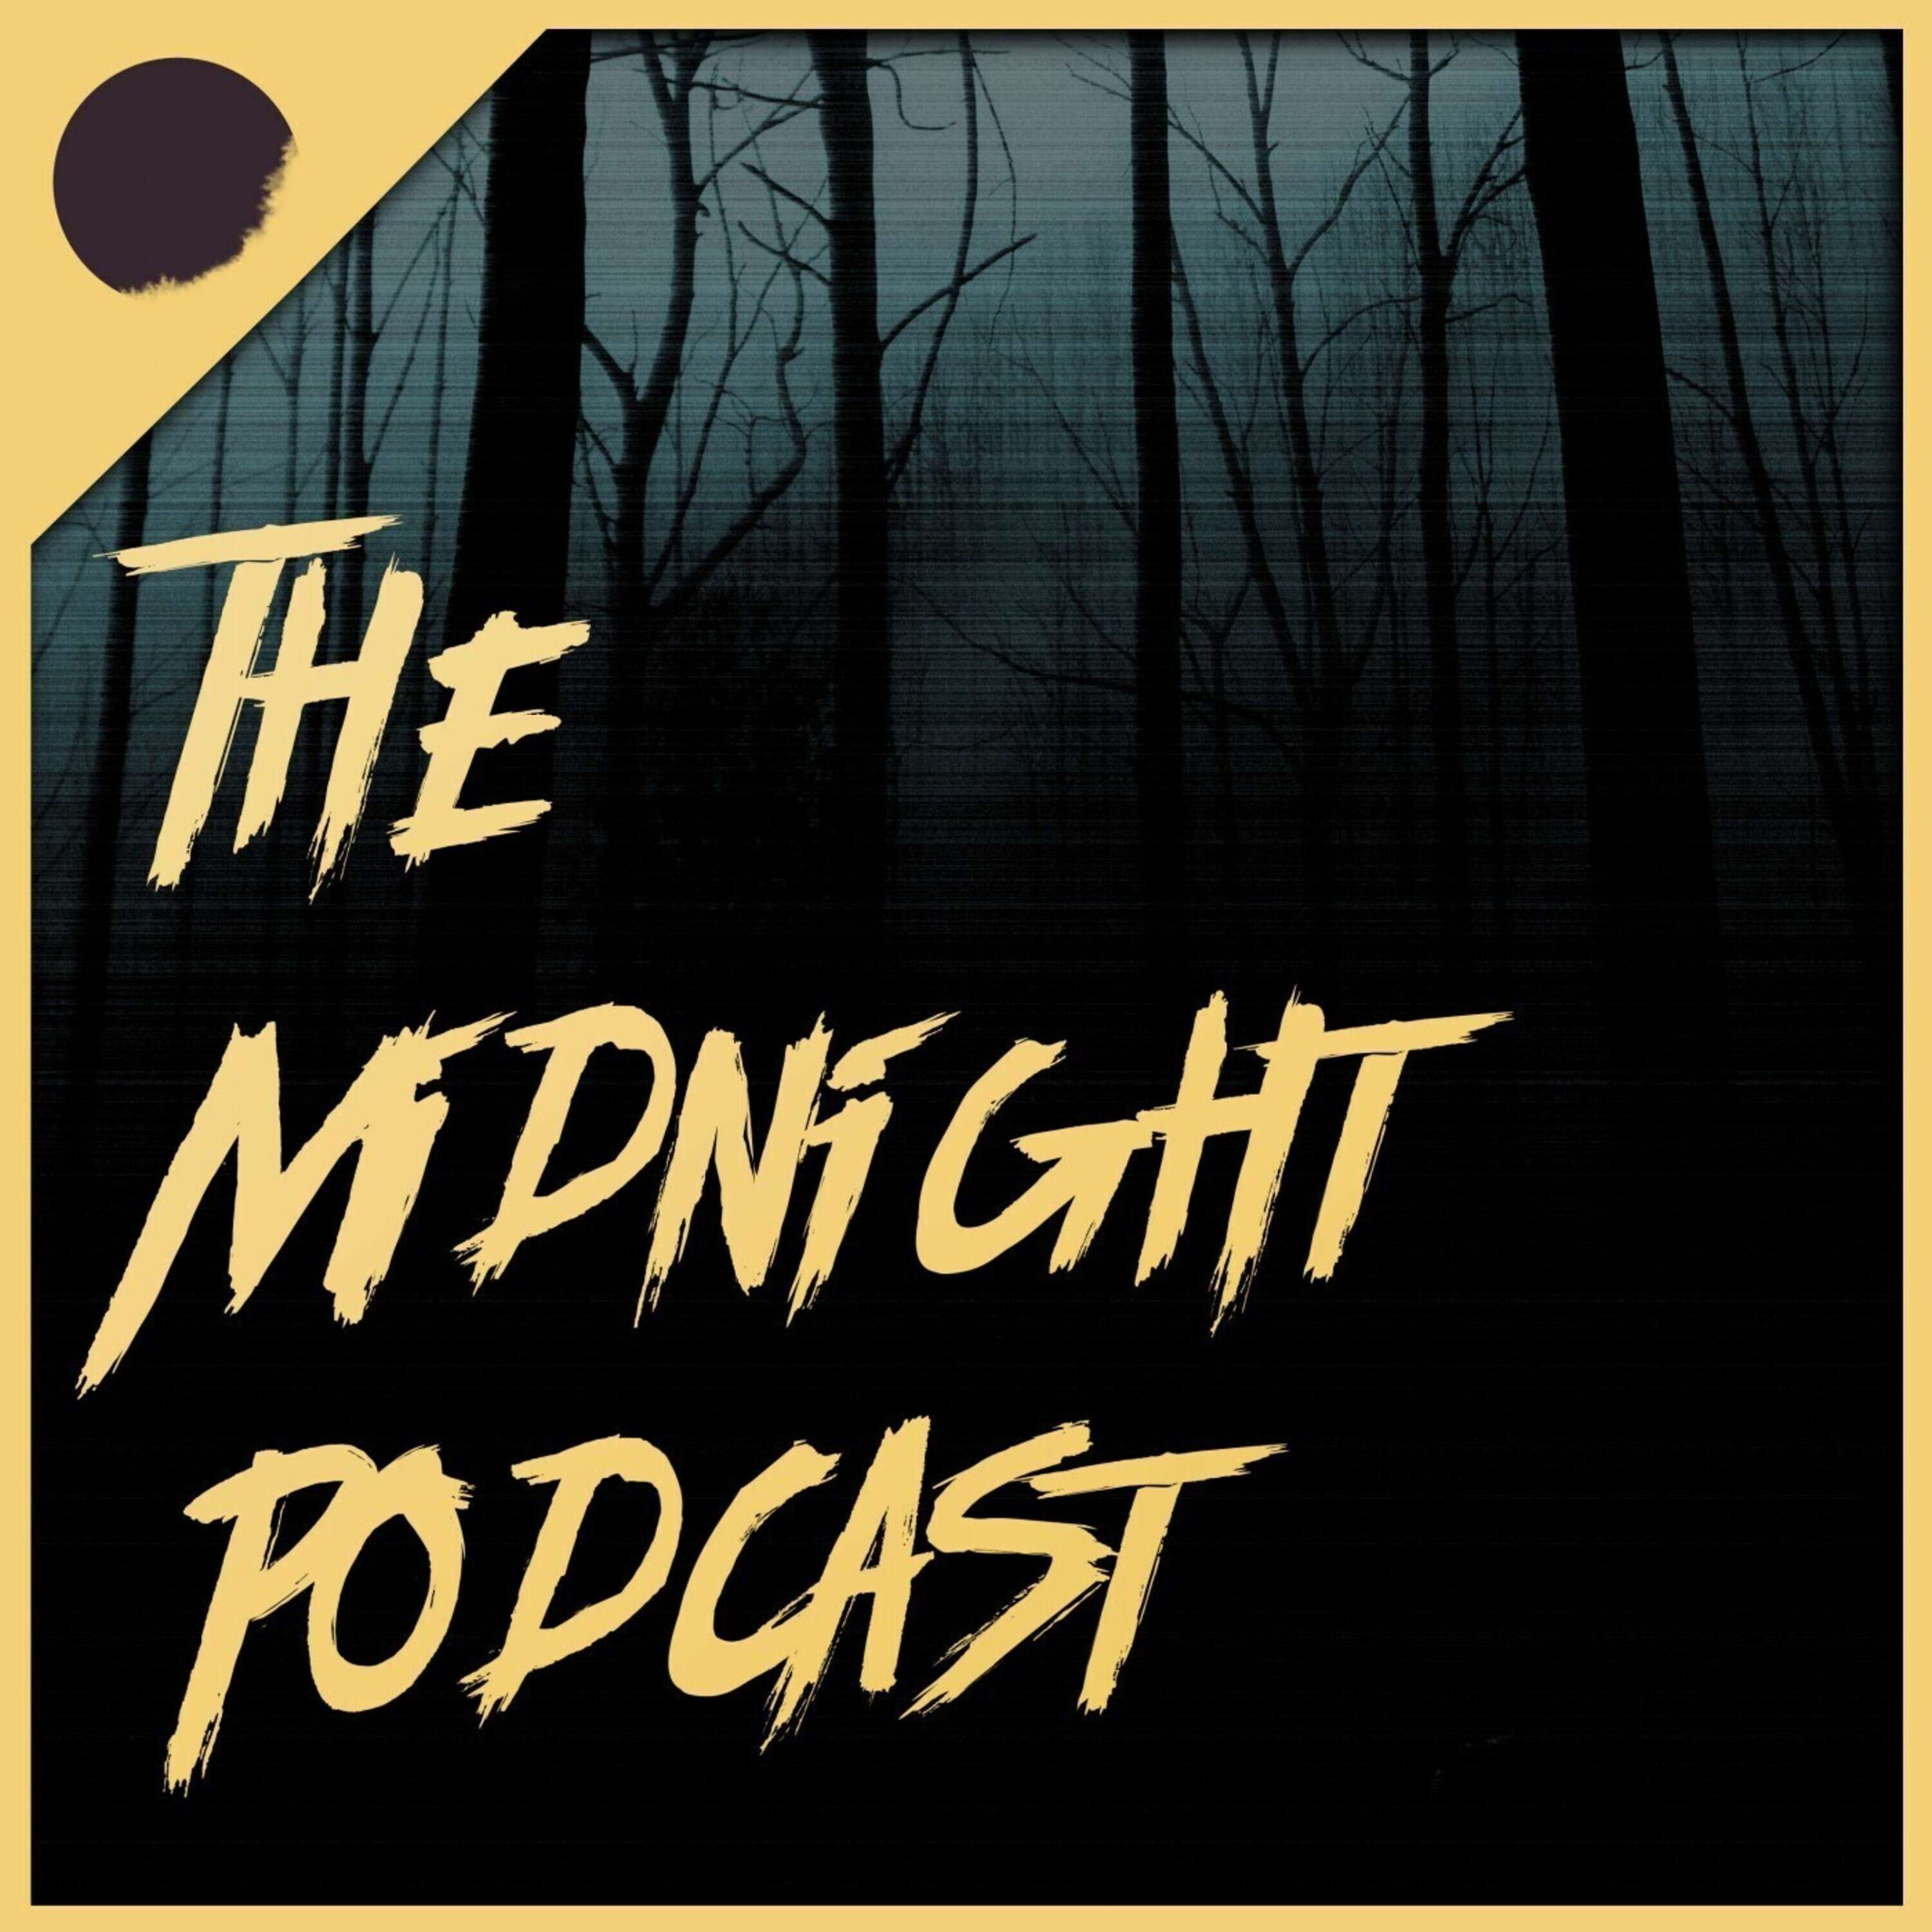 Episode 142 | All of our babies come from the forest